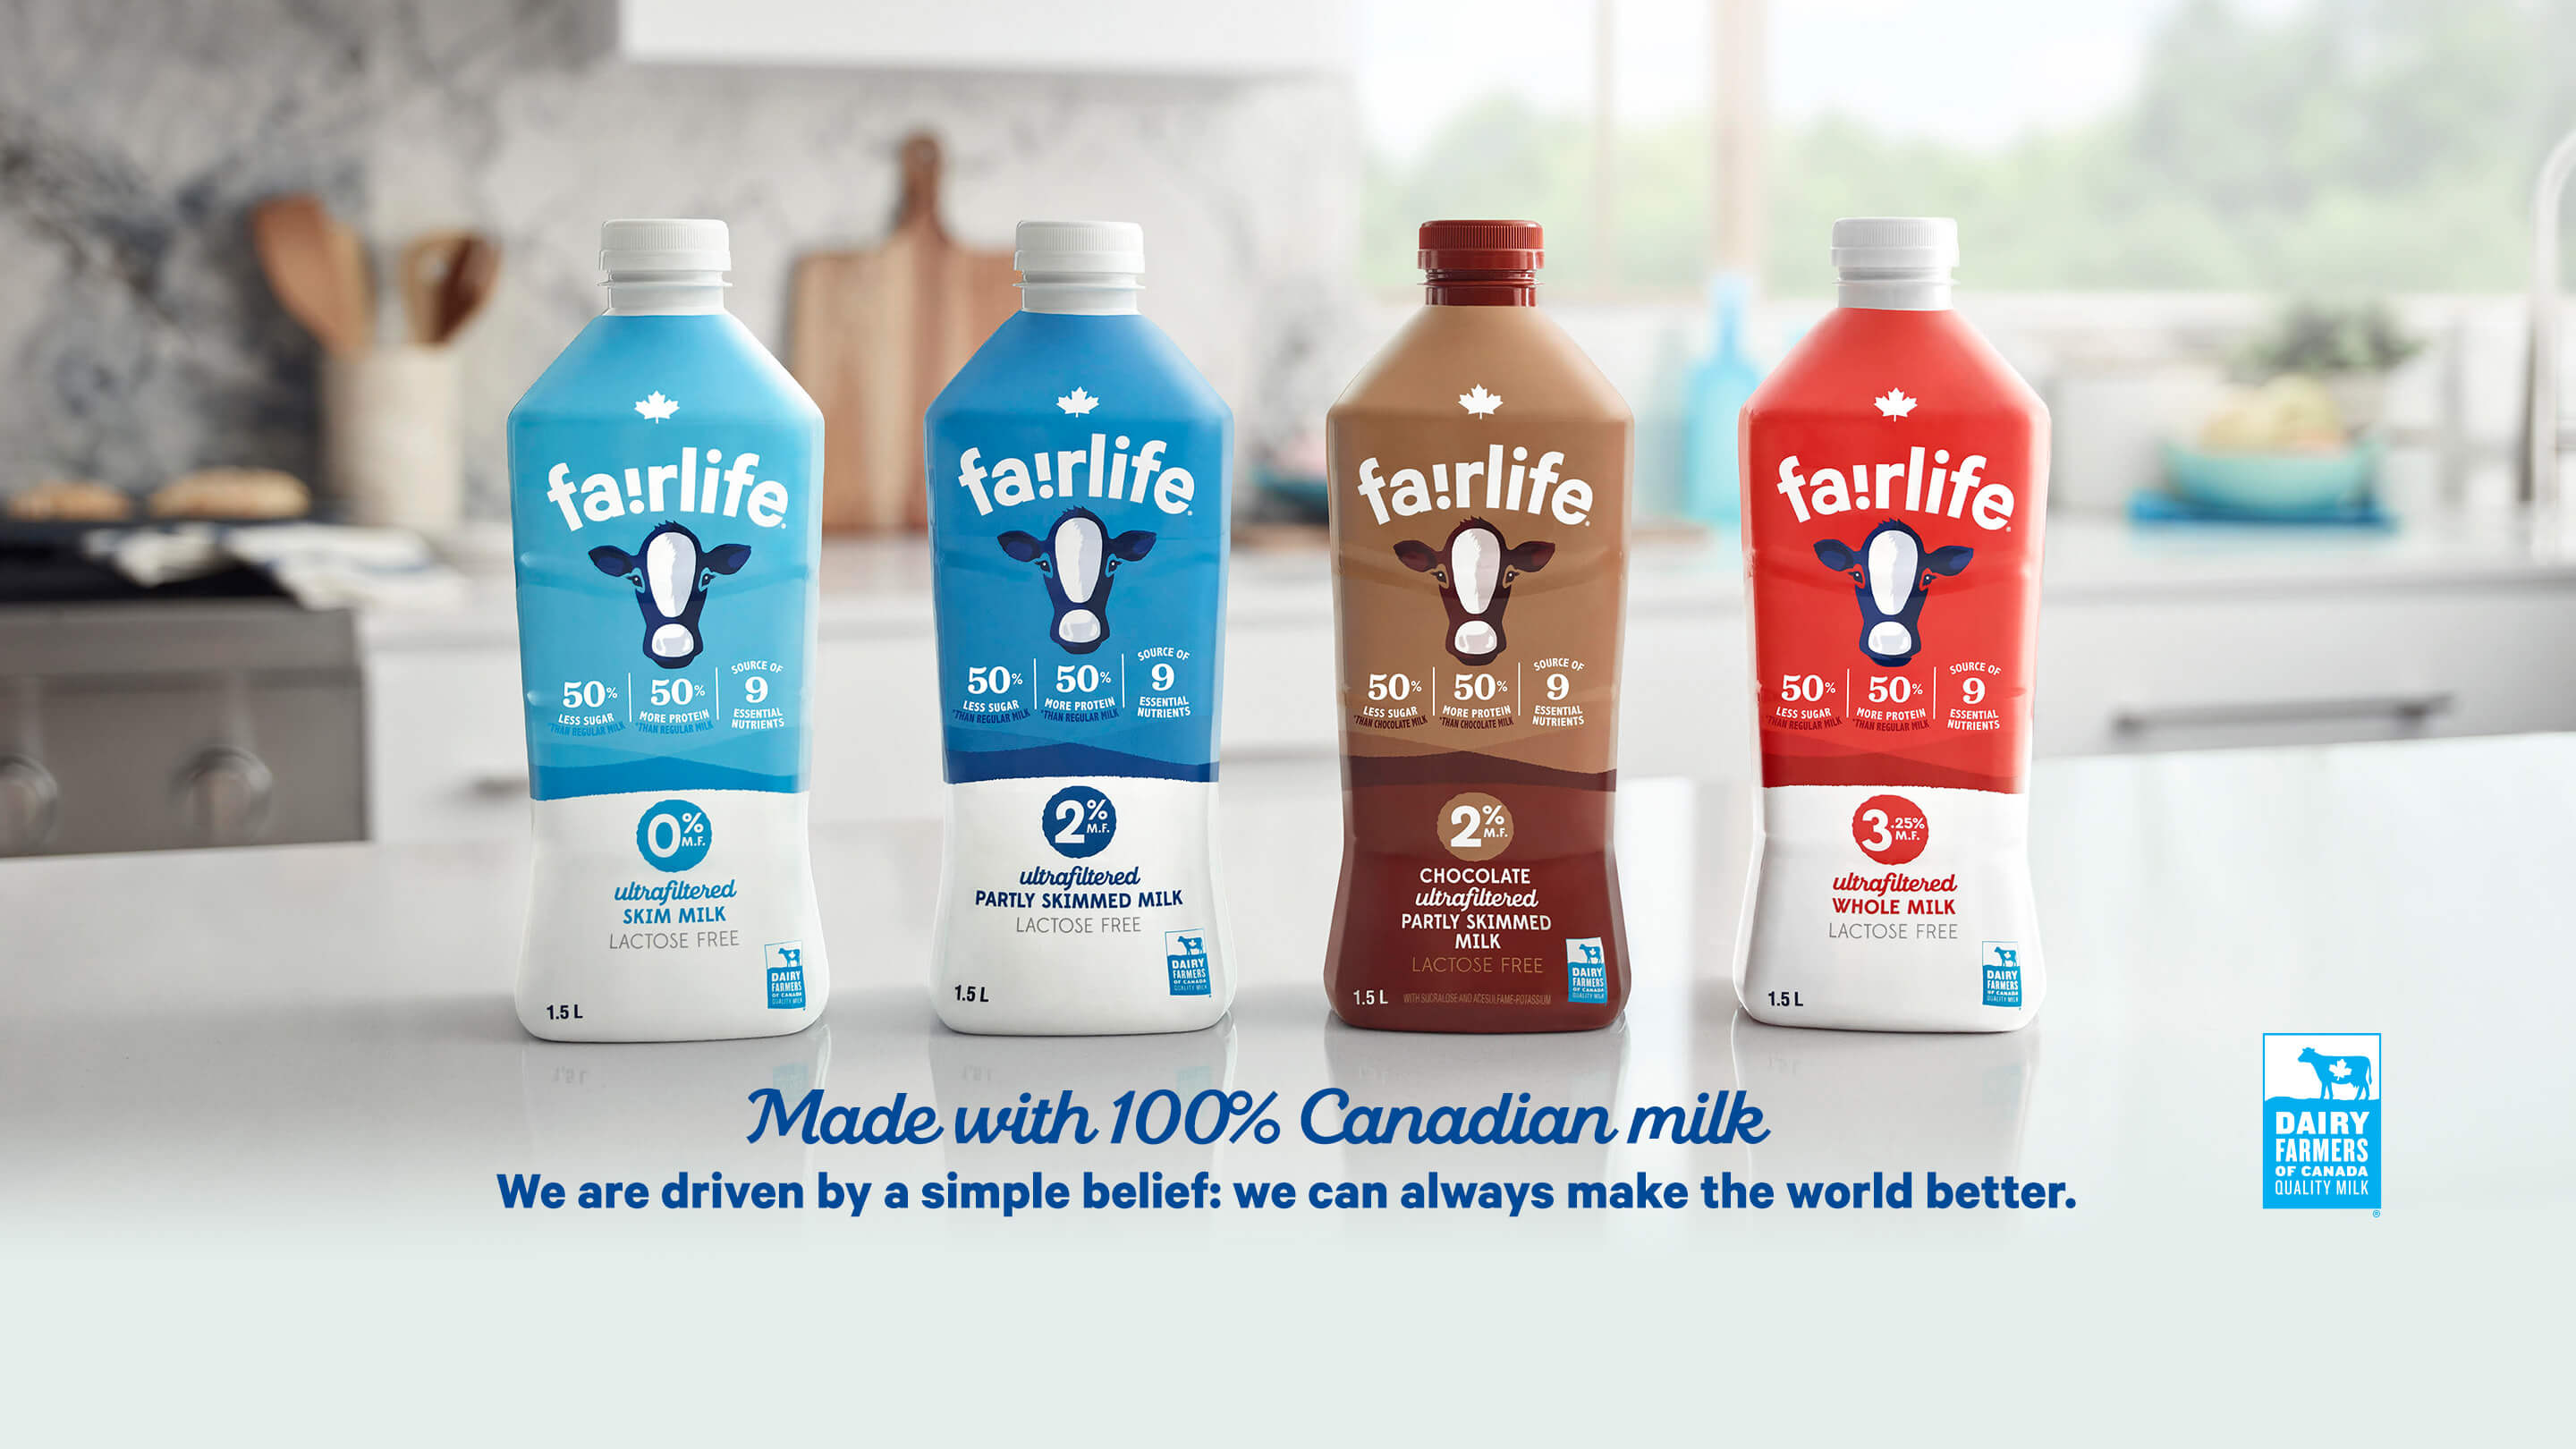 fairlife. Made with 100 % Canadian milk. We are driven by a simple belief: we can always make the world better.